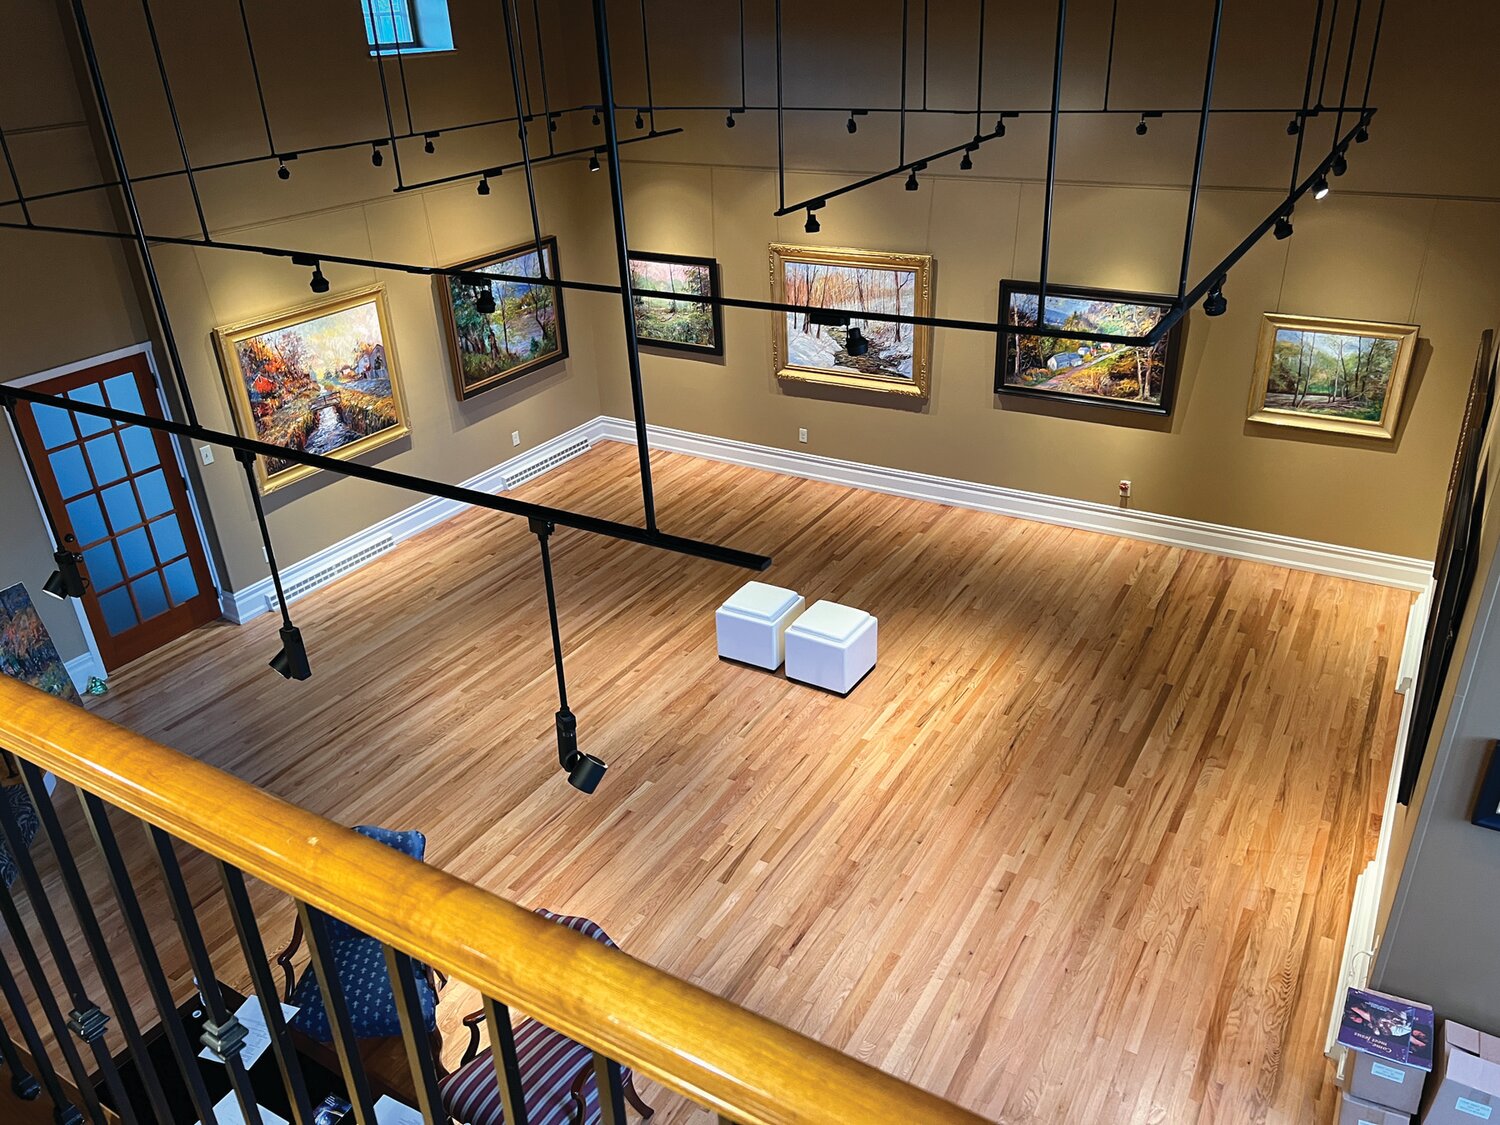 Alderfer Auction plans to utilize Rich Timmons Gallery in Buckingham Township for special exhibitions, previews, evaluations, and events.